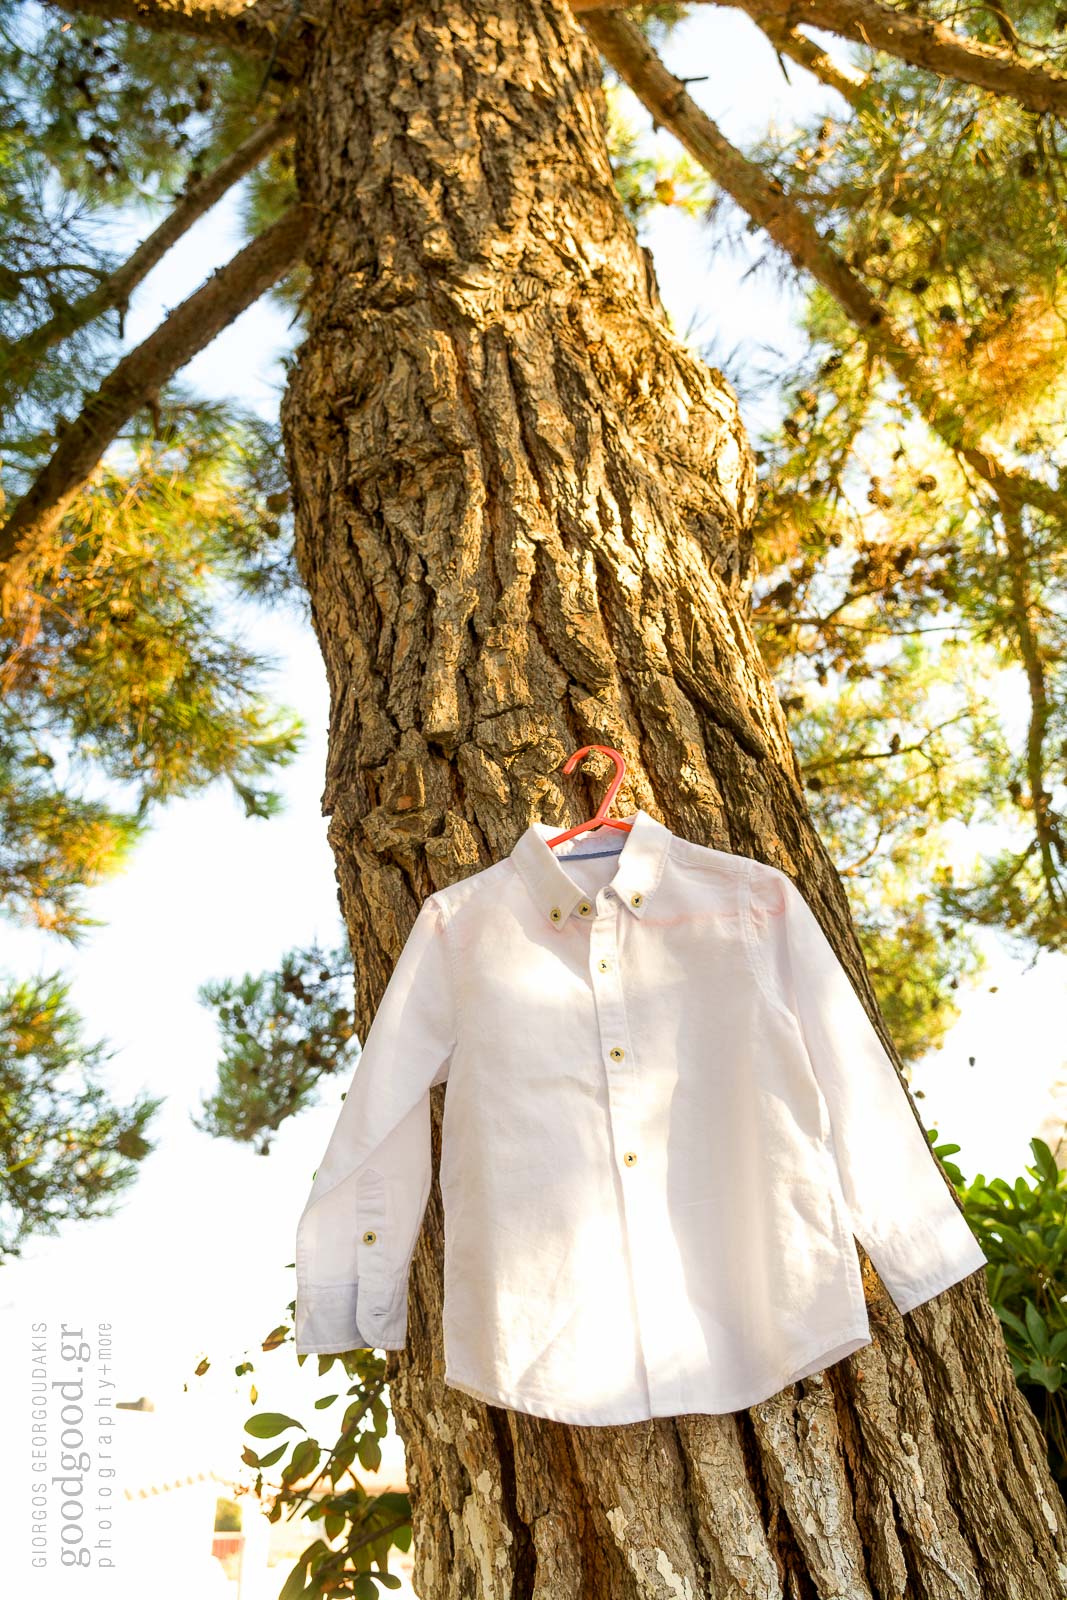 White christening shirt hung on a tree trunk